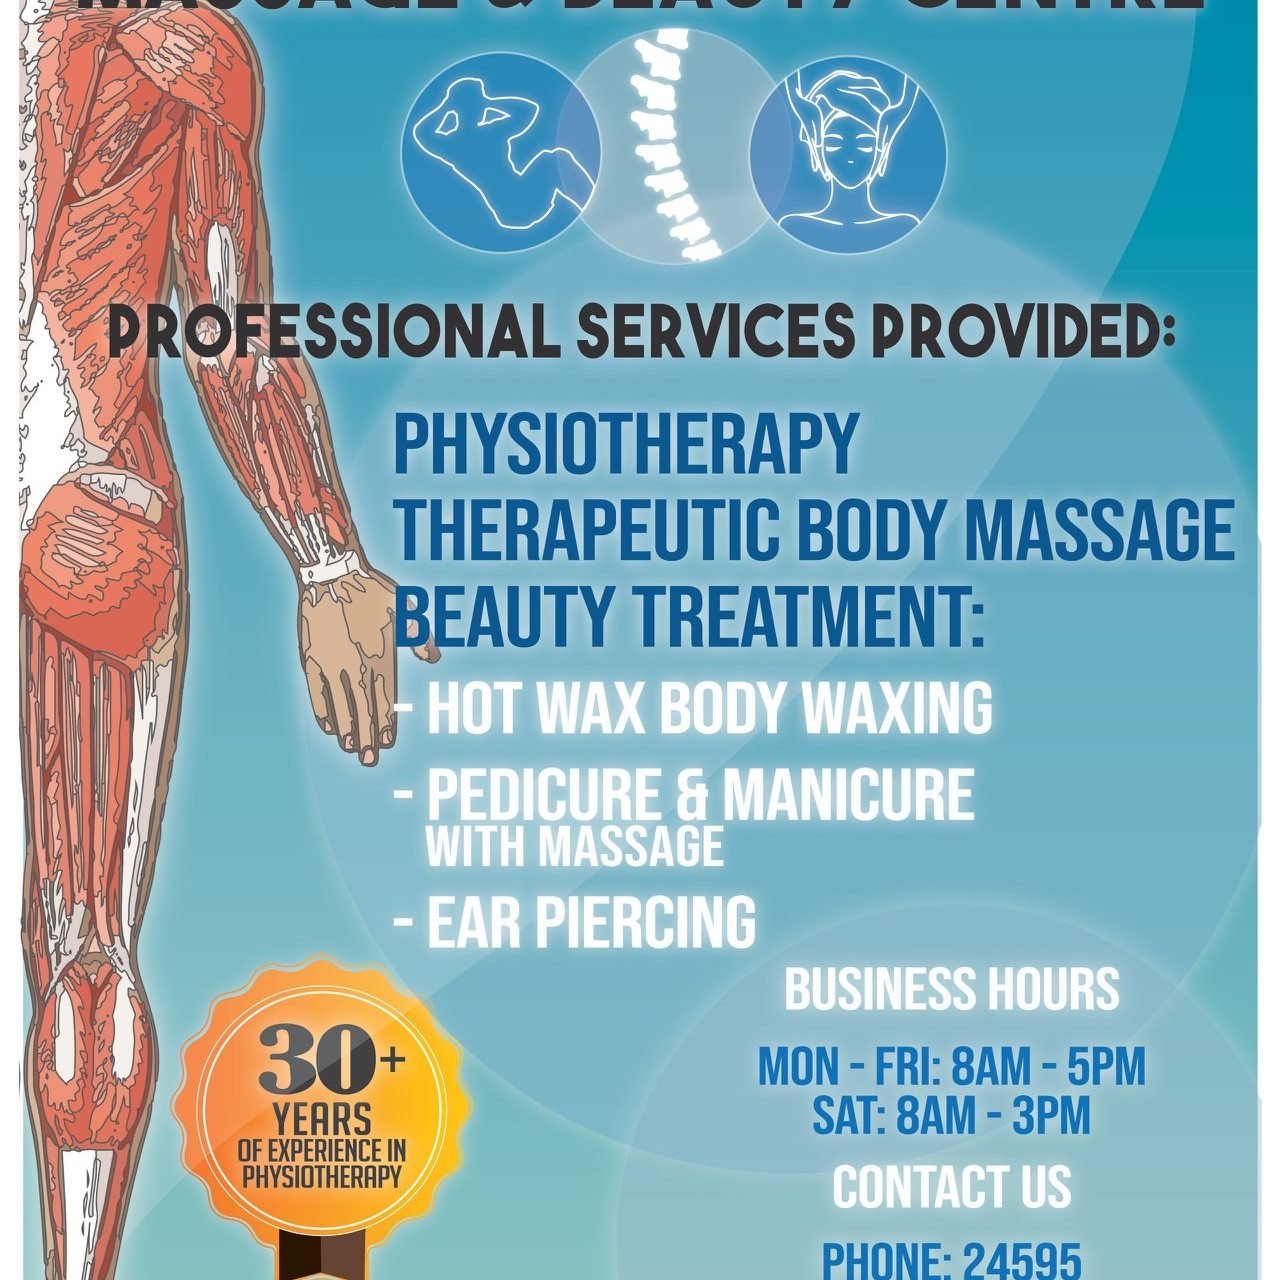 Justina’s Physiotherapy